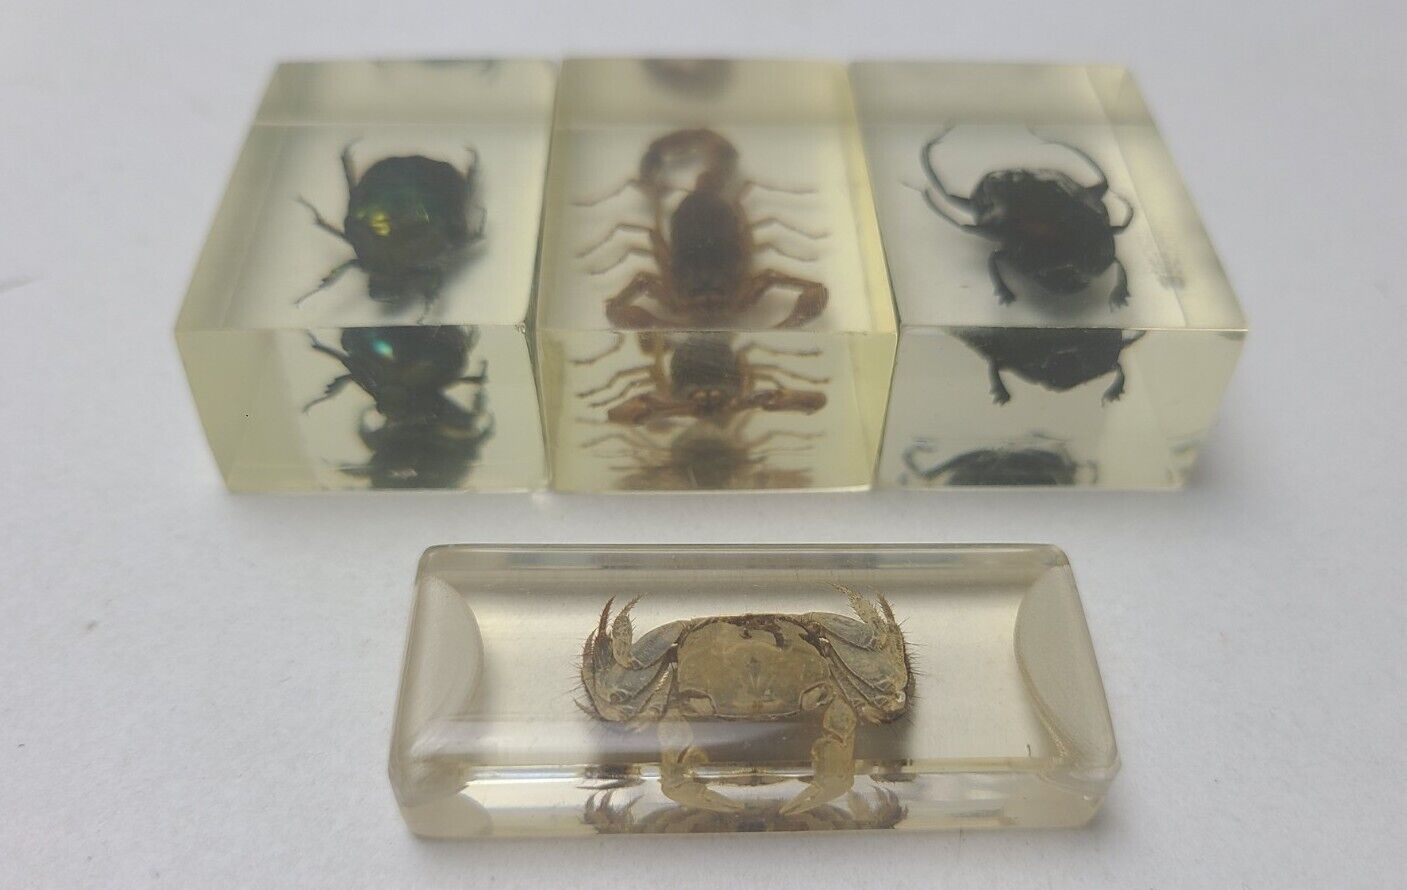 Vintage Real Scorpion Beetle Crab Dung Beetle in Lucite or Resin? Lot of 4